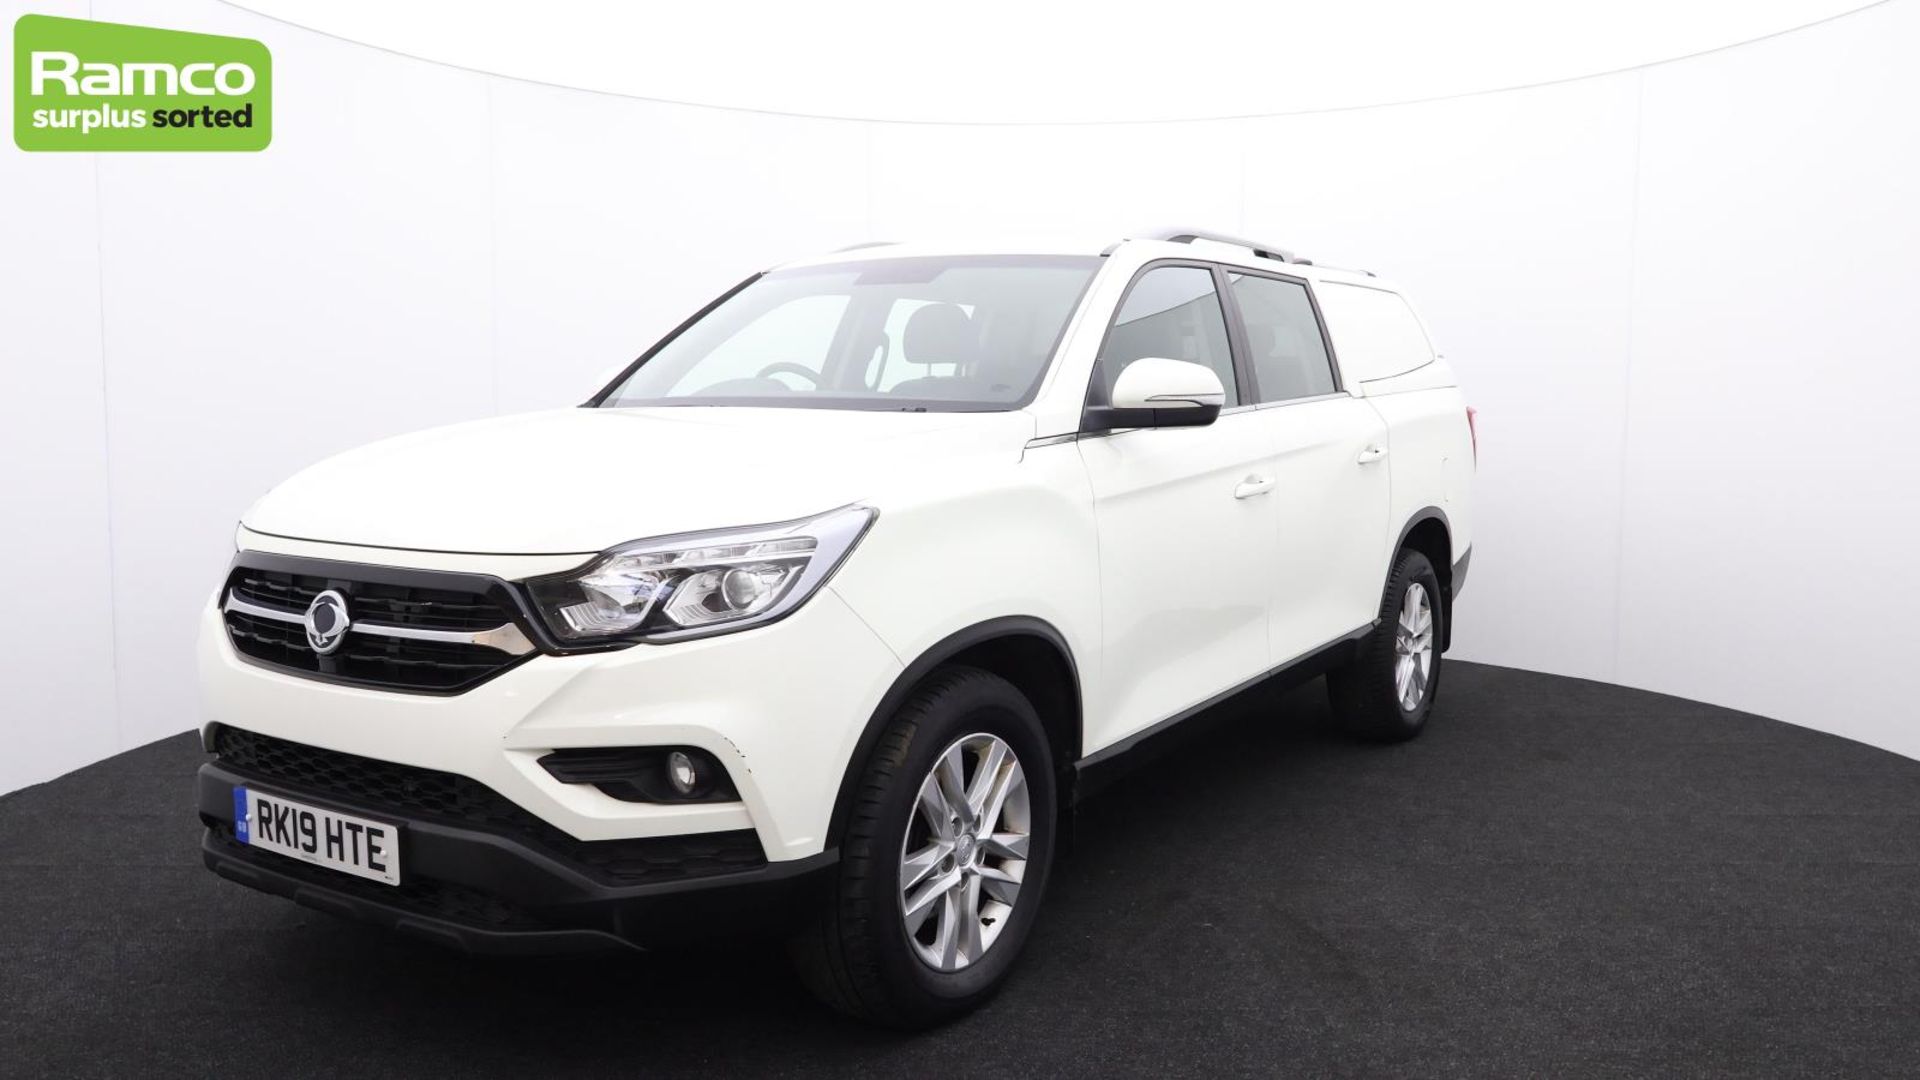 SsangYong Musso Rebel Auto RK19 HTE 2.2L Pick Up Euro 6